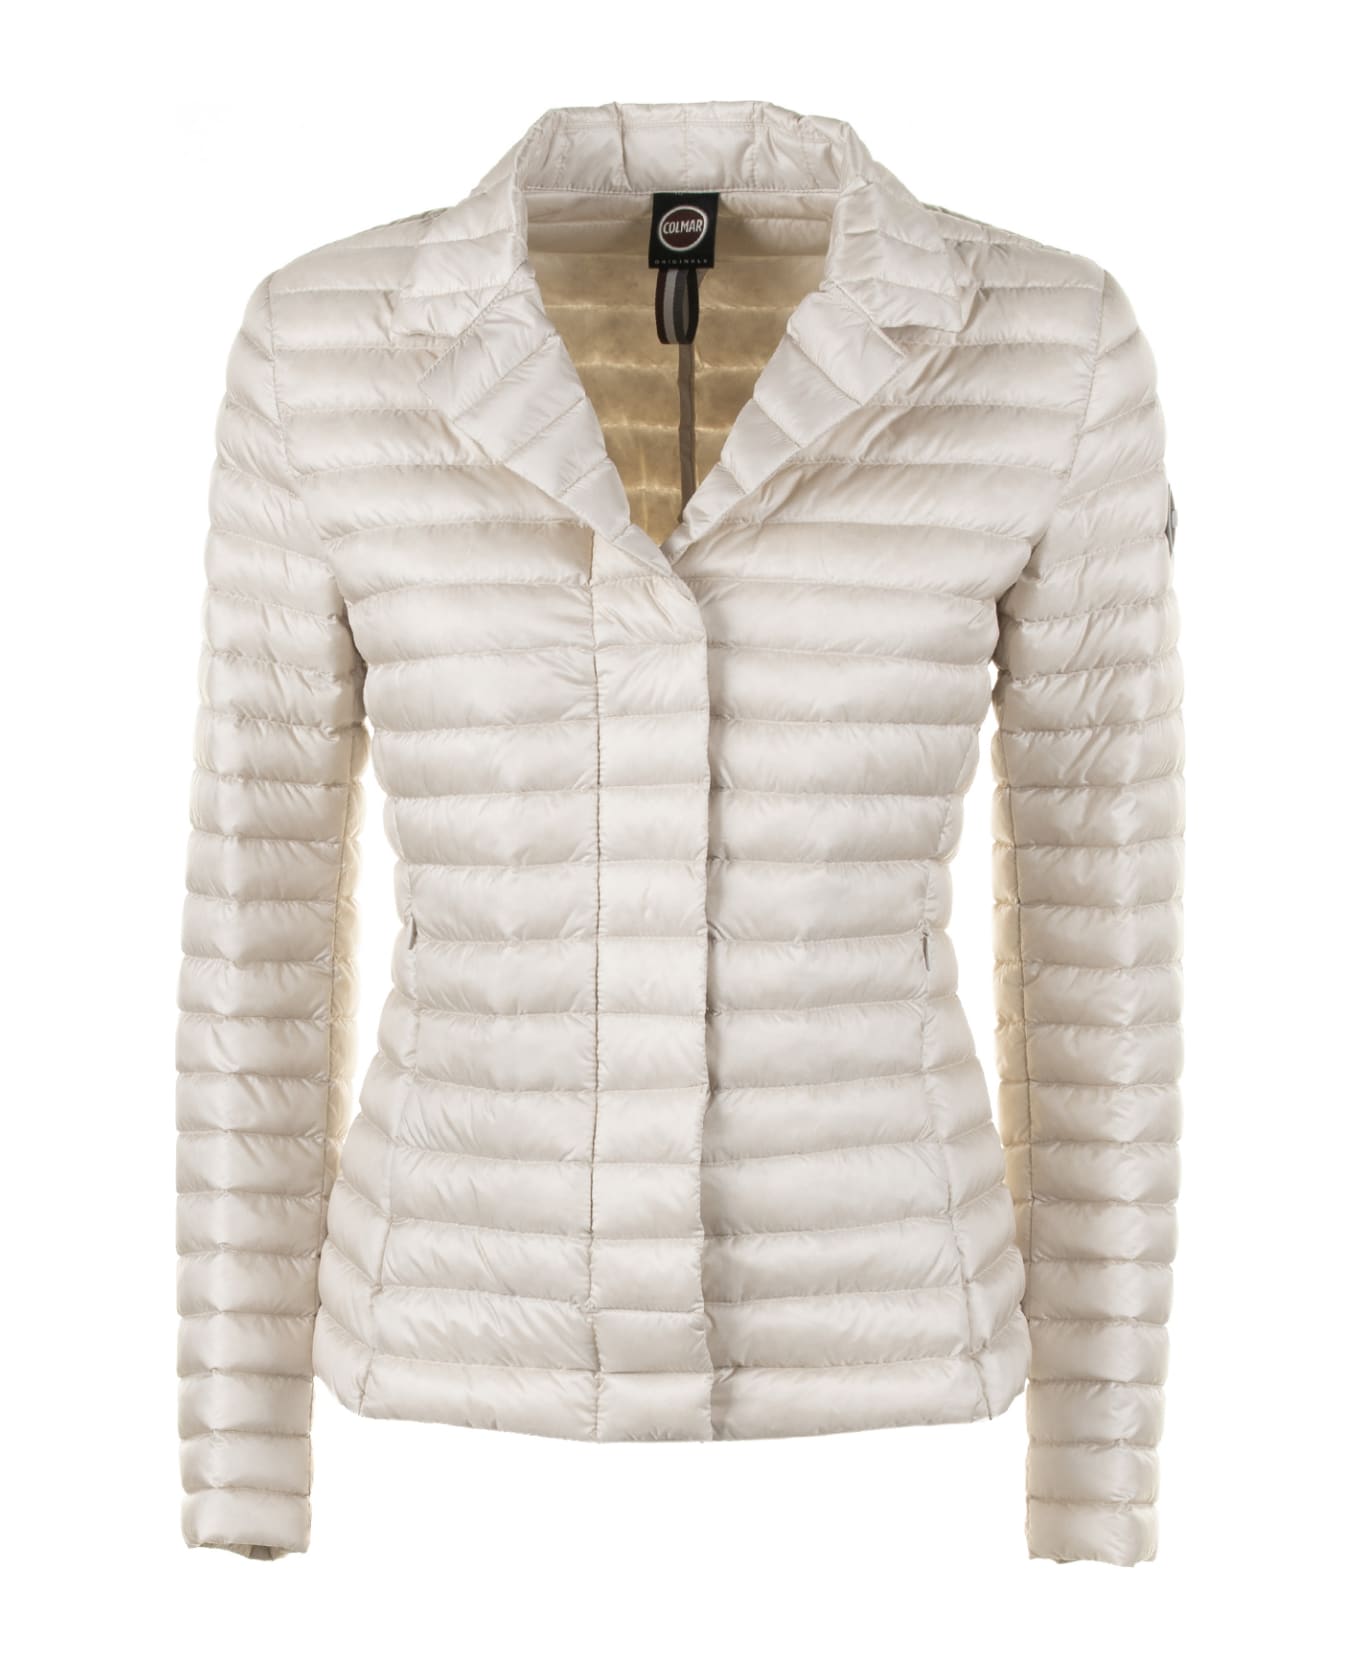 Colmar Blazer Quilted Down Jacket With Lapel Collar - PORCELLANA